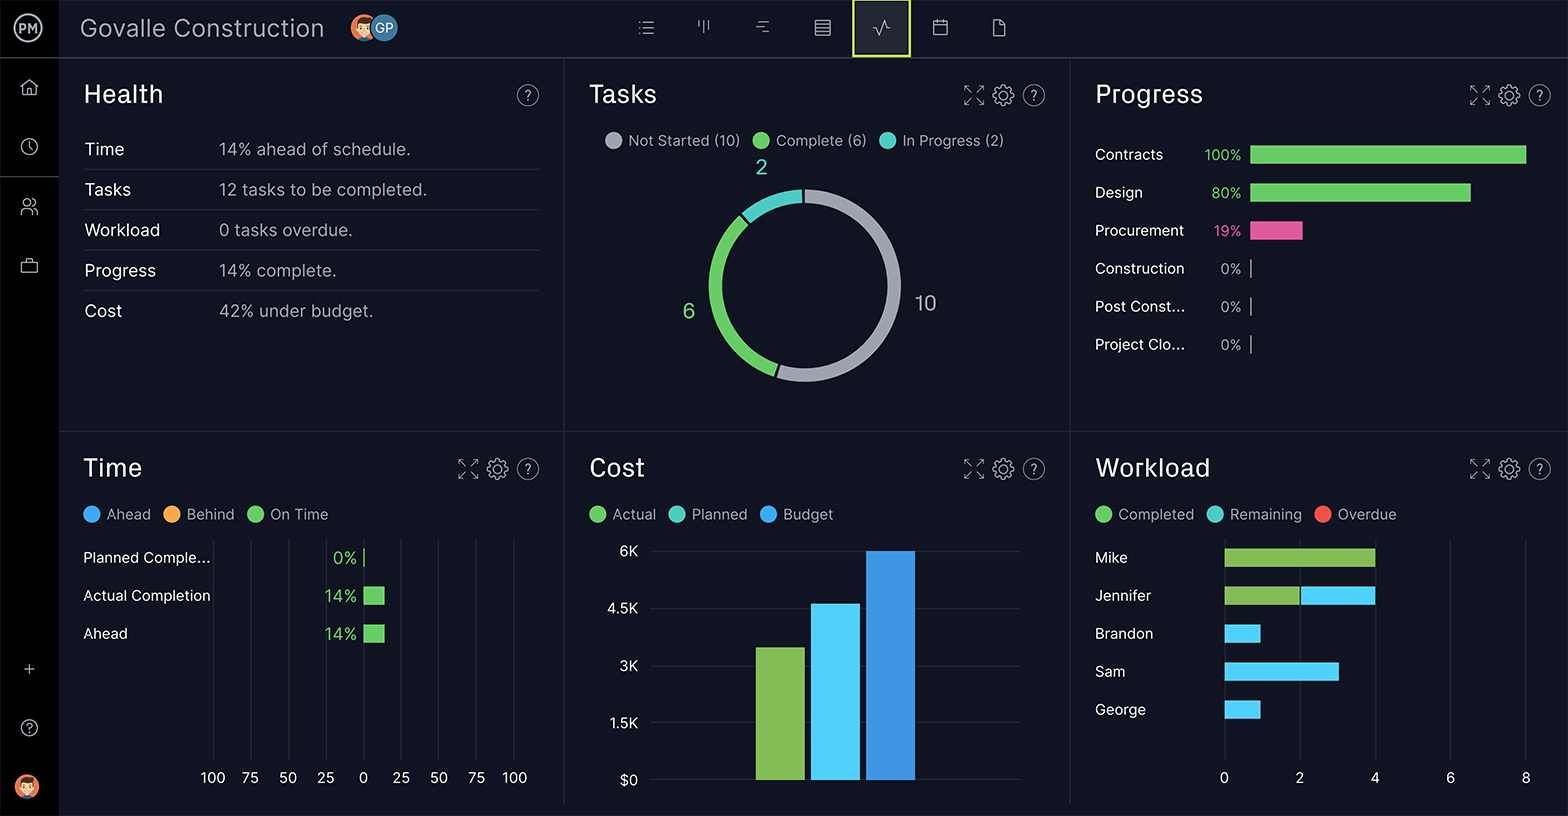 Track PRINCE2 projects in real time with project management dashboards